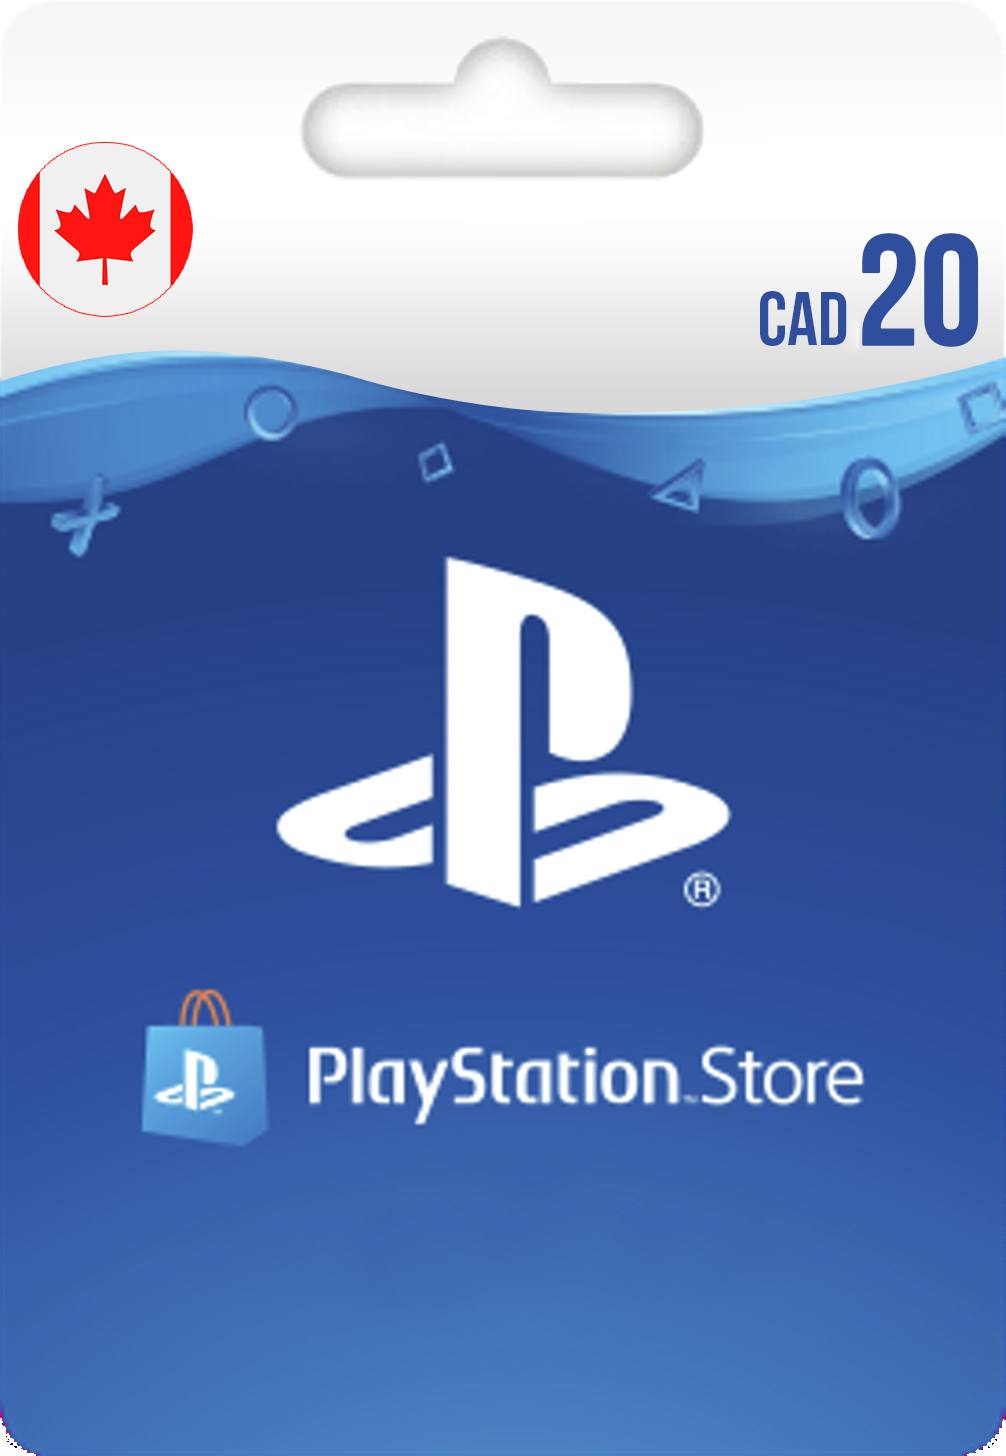 PSN Card 20 CAD | Playstation Network Canada for PSP, PS3, Go, PS Vita, PS4, PS5